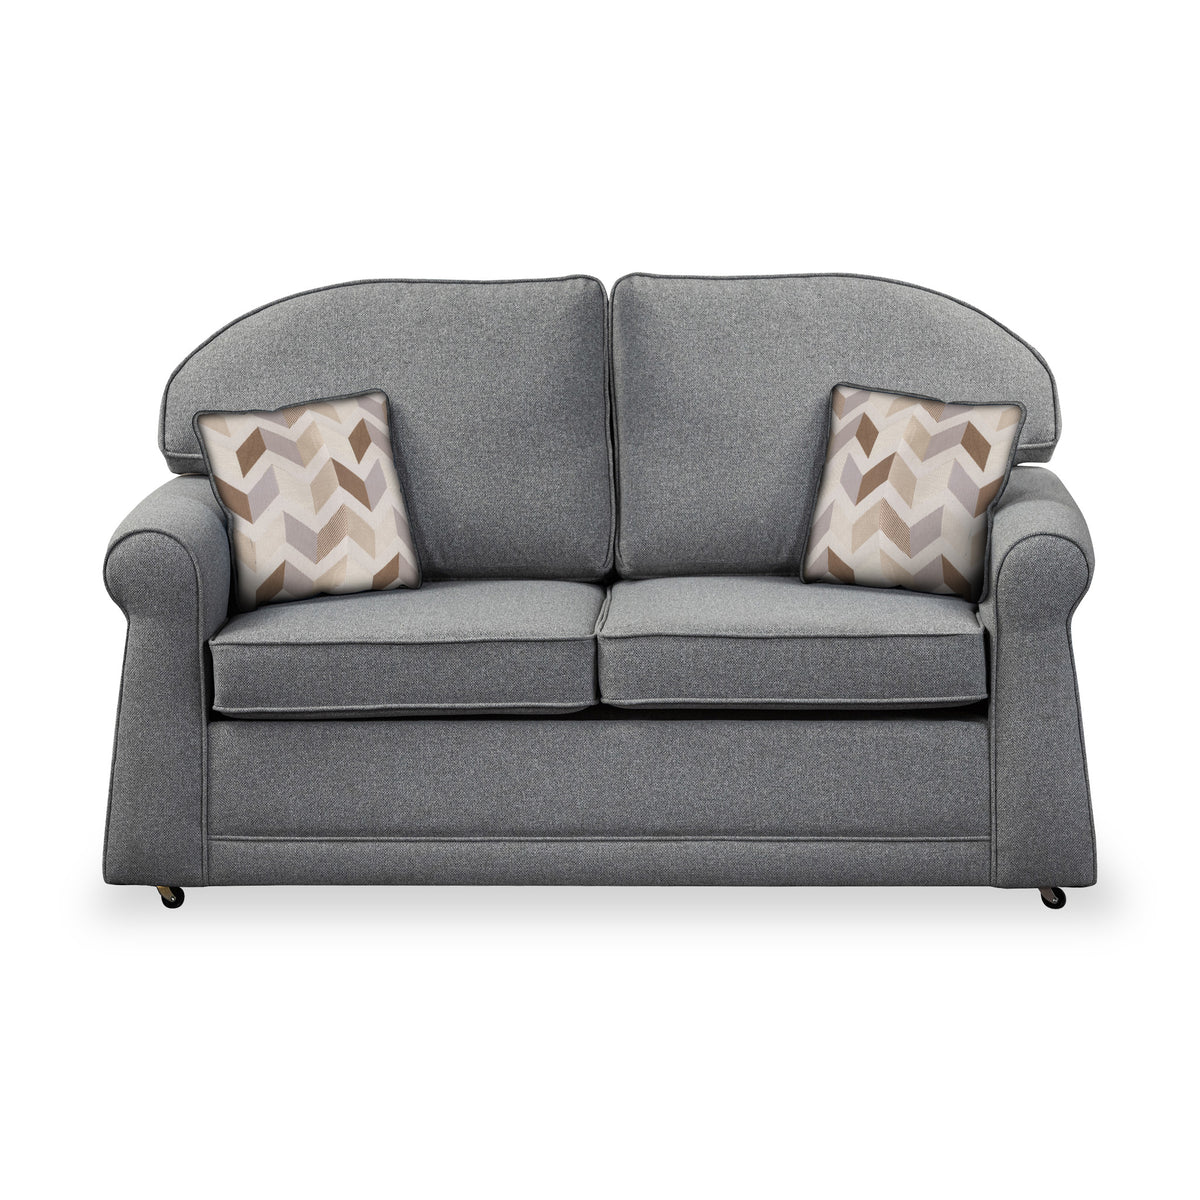 Croxdon Silver Faux Linen 2 Seater Sofabed with Oatmeal Scatter Cushions from Roseland Furniture